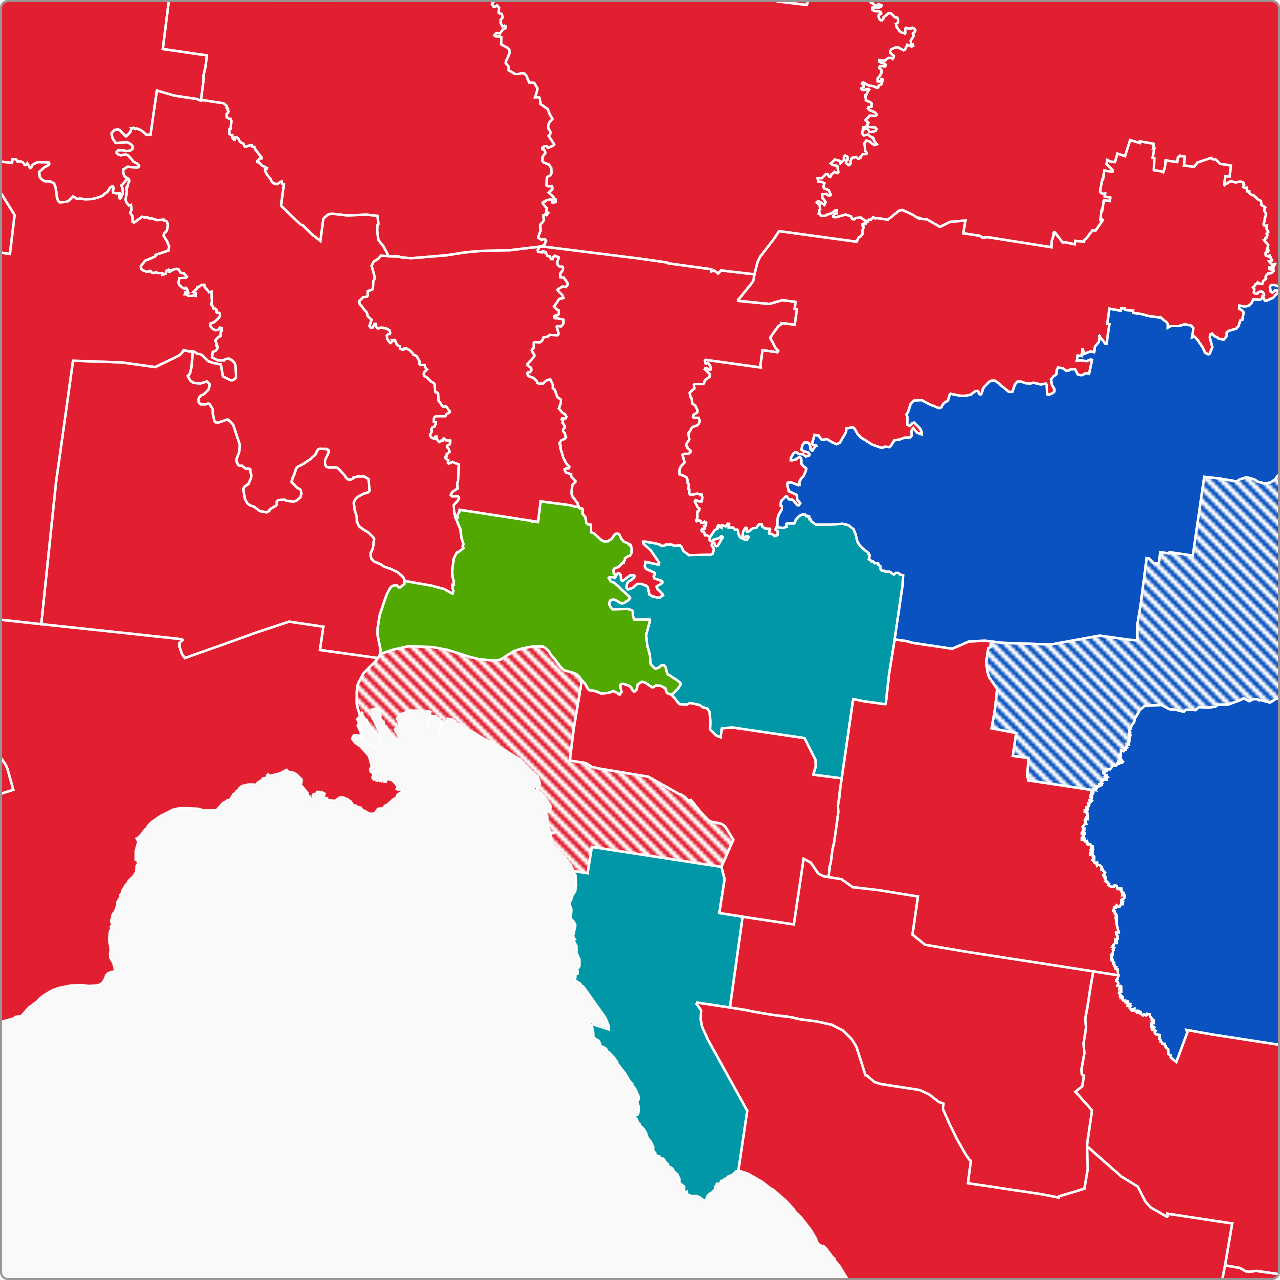 A map of Melbourne showing the result of the 2022 election.